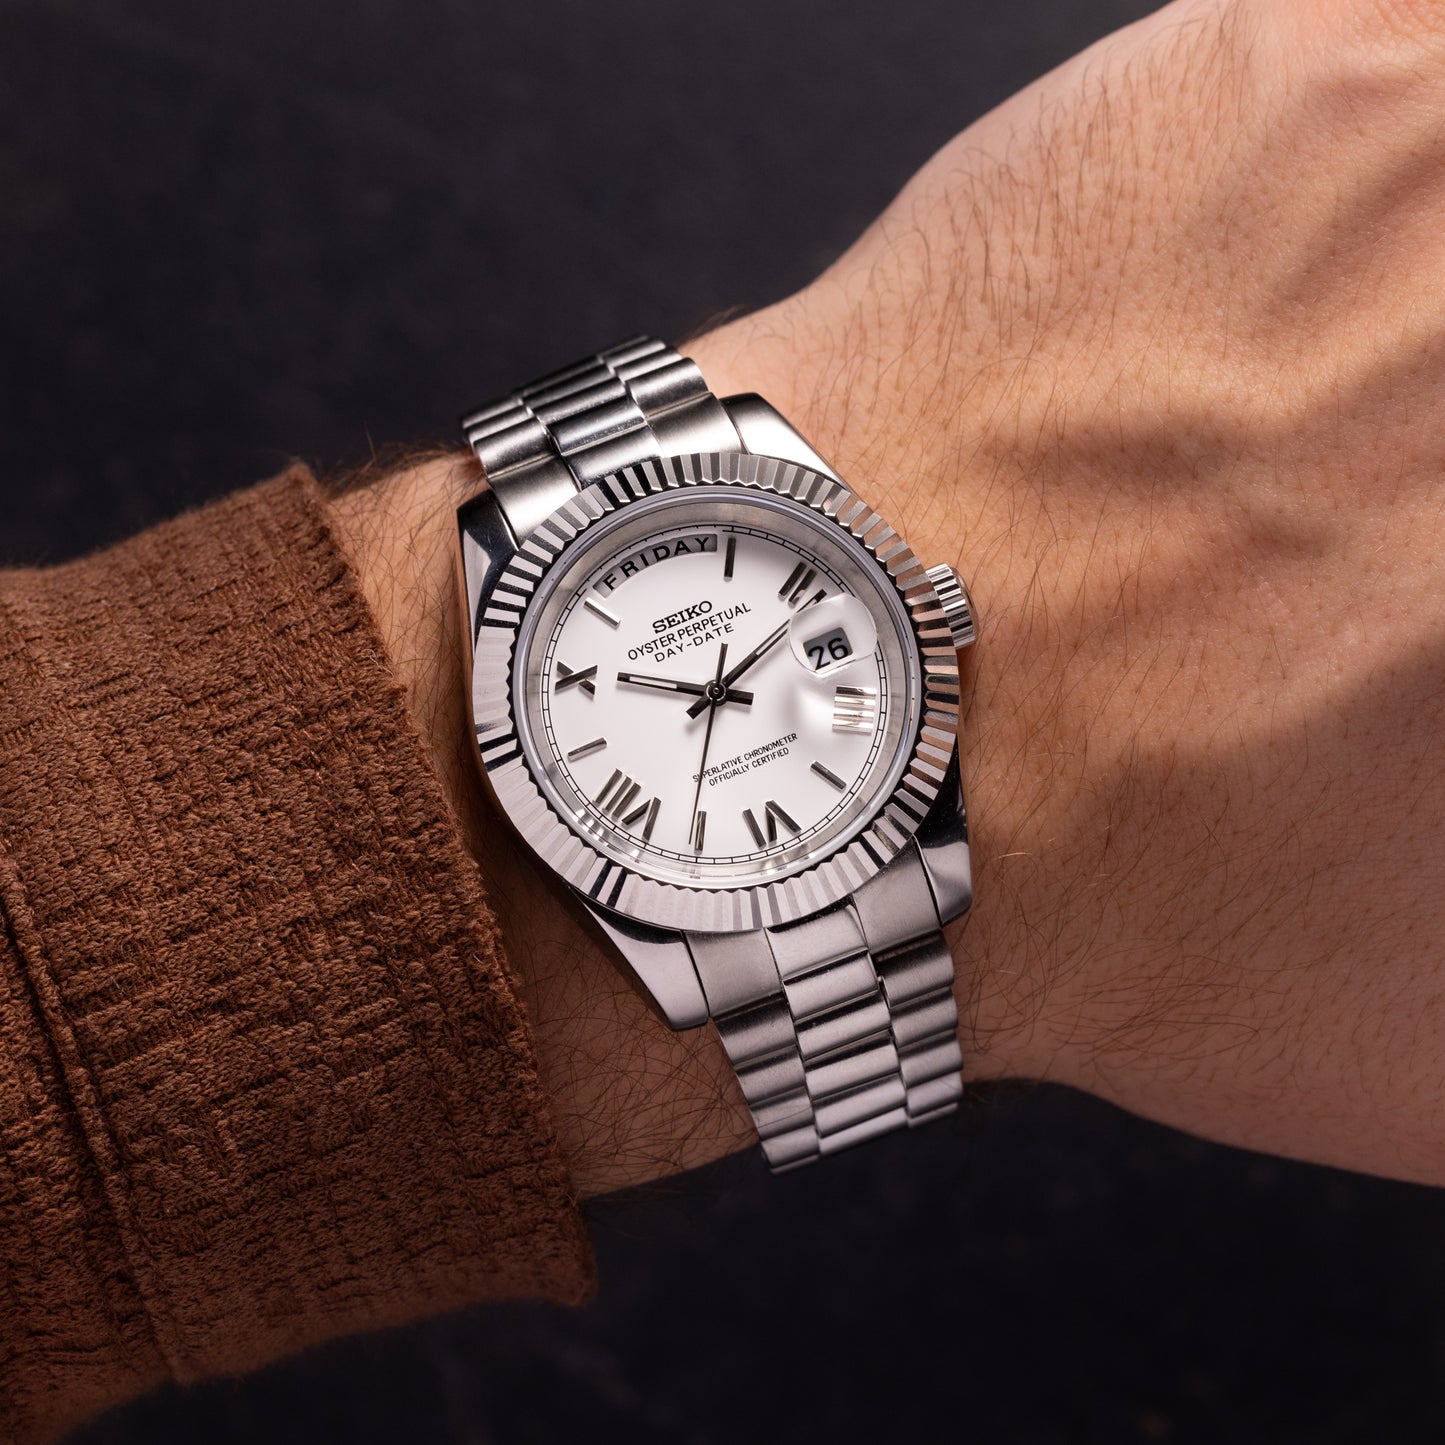 Seiko Mod Oyster Perpetual Day-Date Watch with White Dial